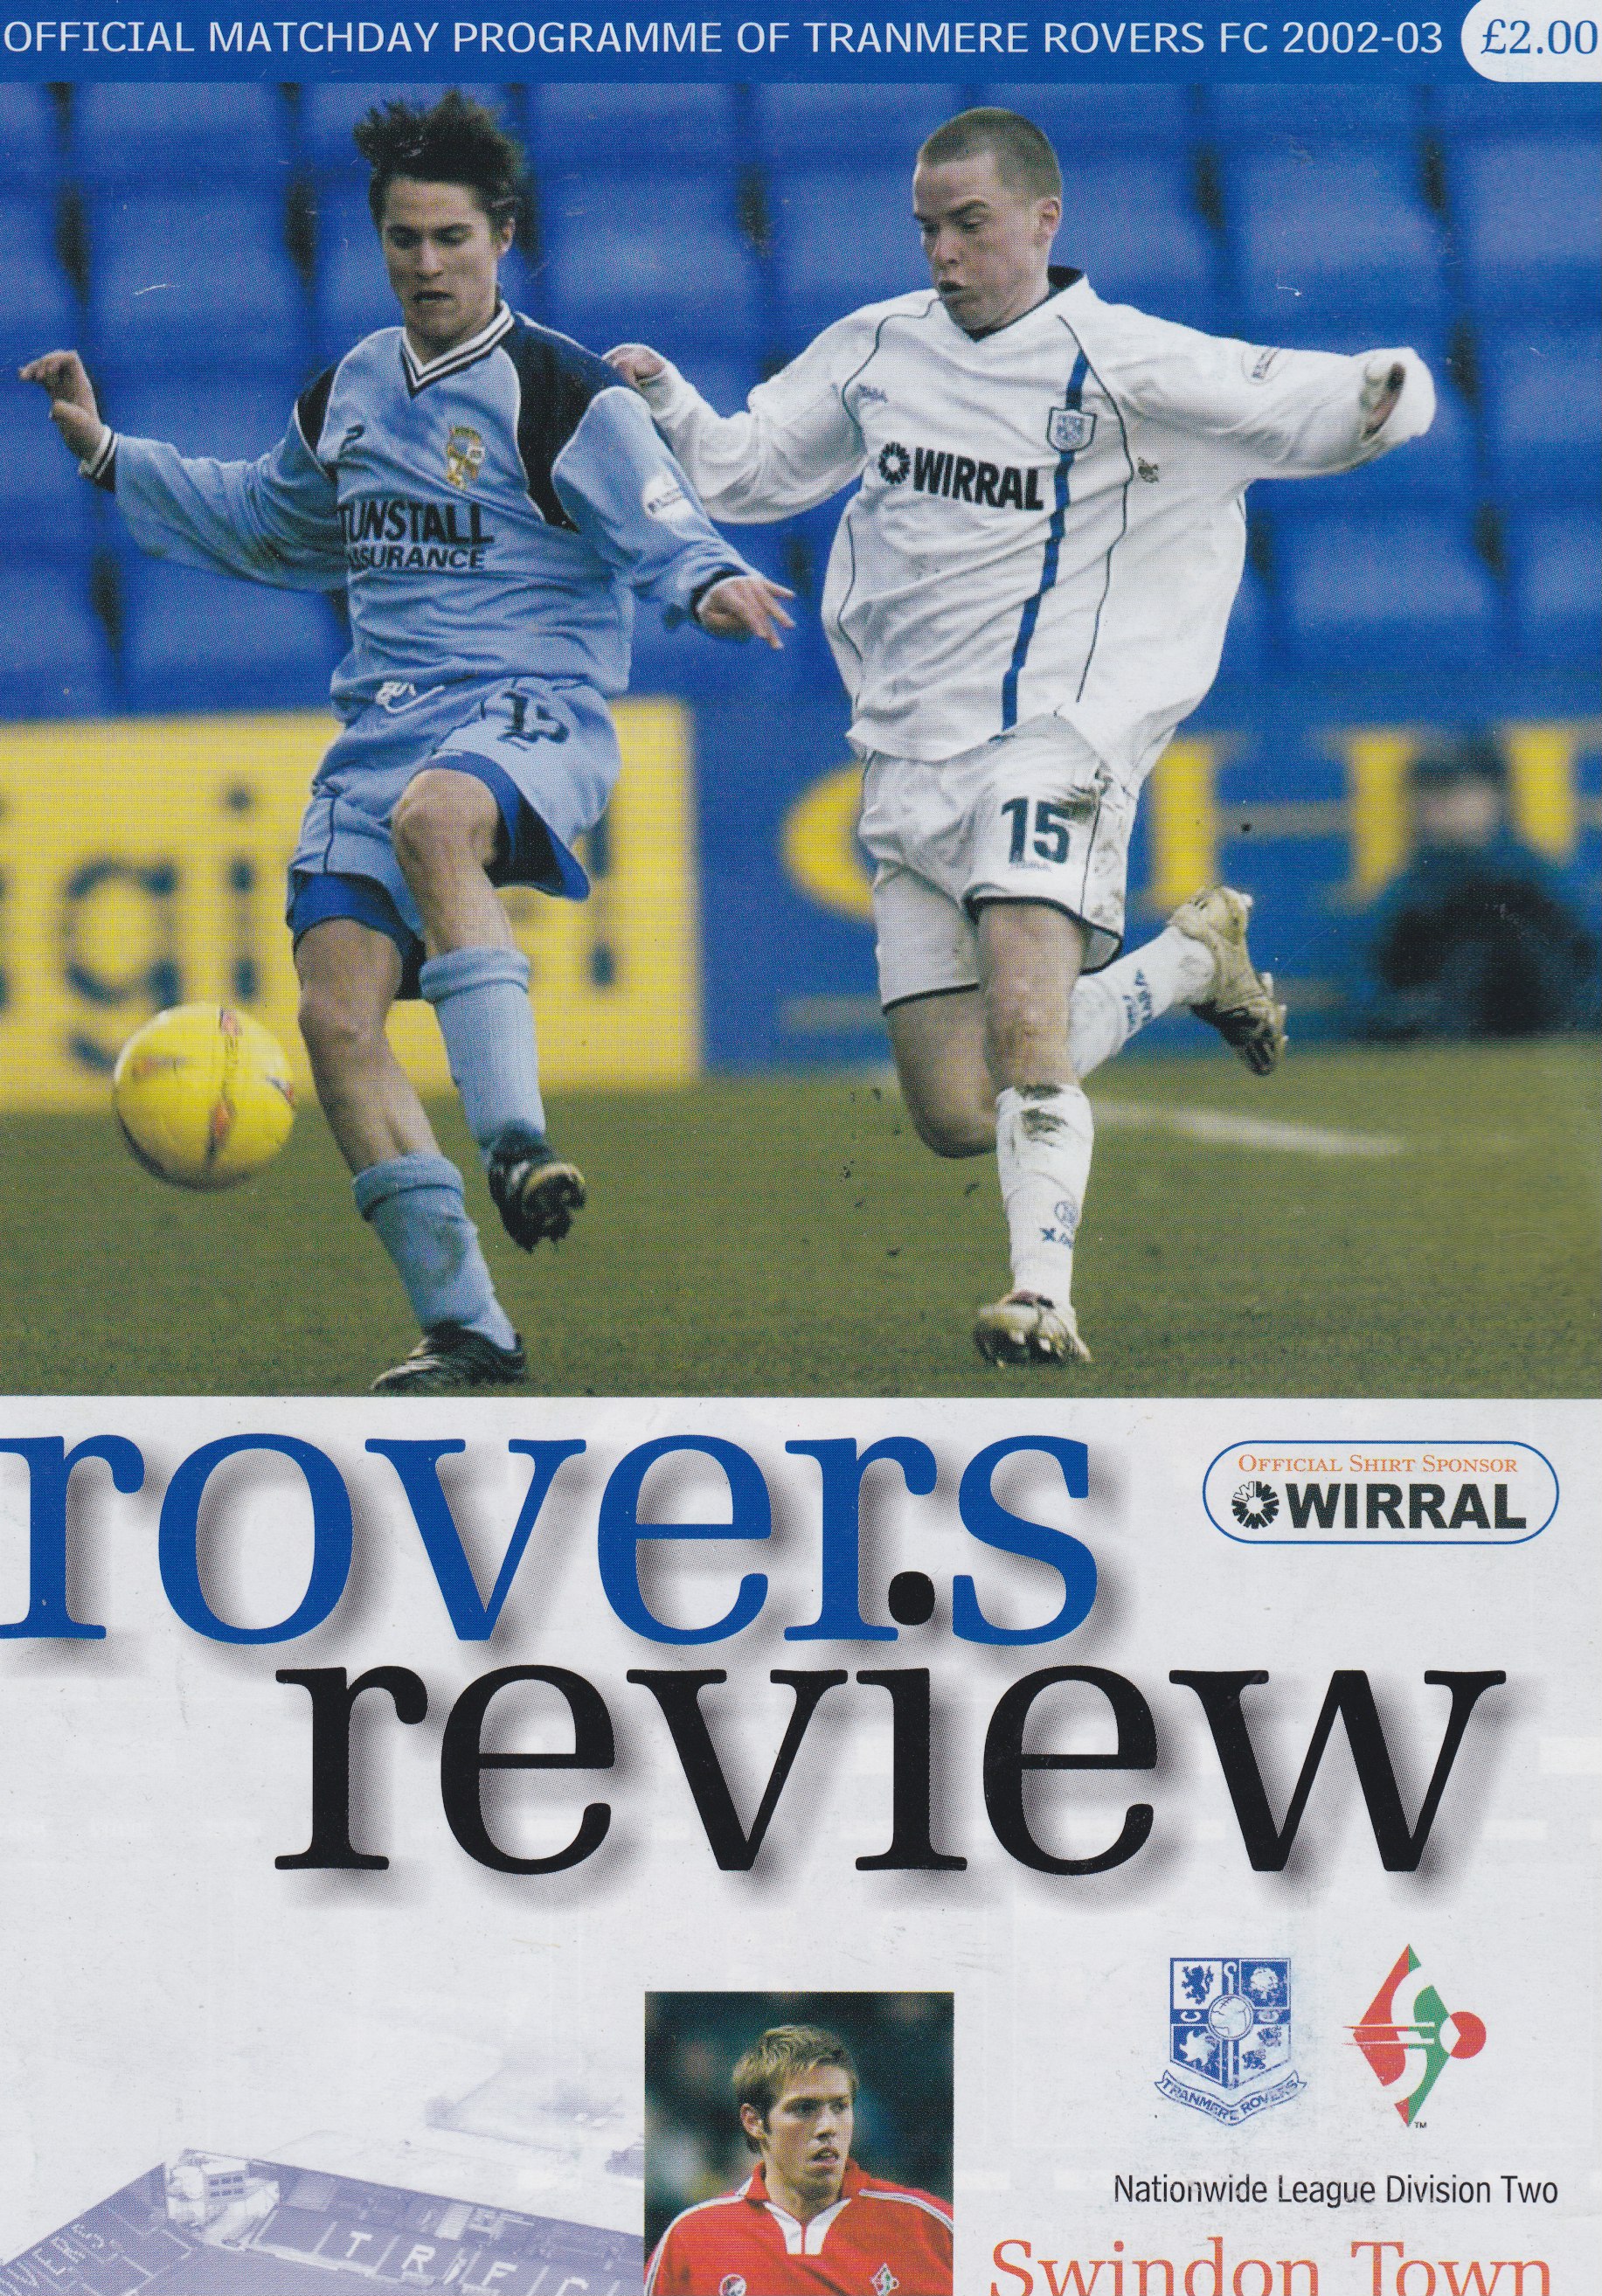 Match Programme For {home}} 0-1 Swindon Town, League, 2003-02-08